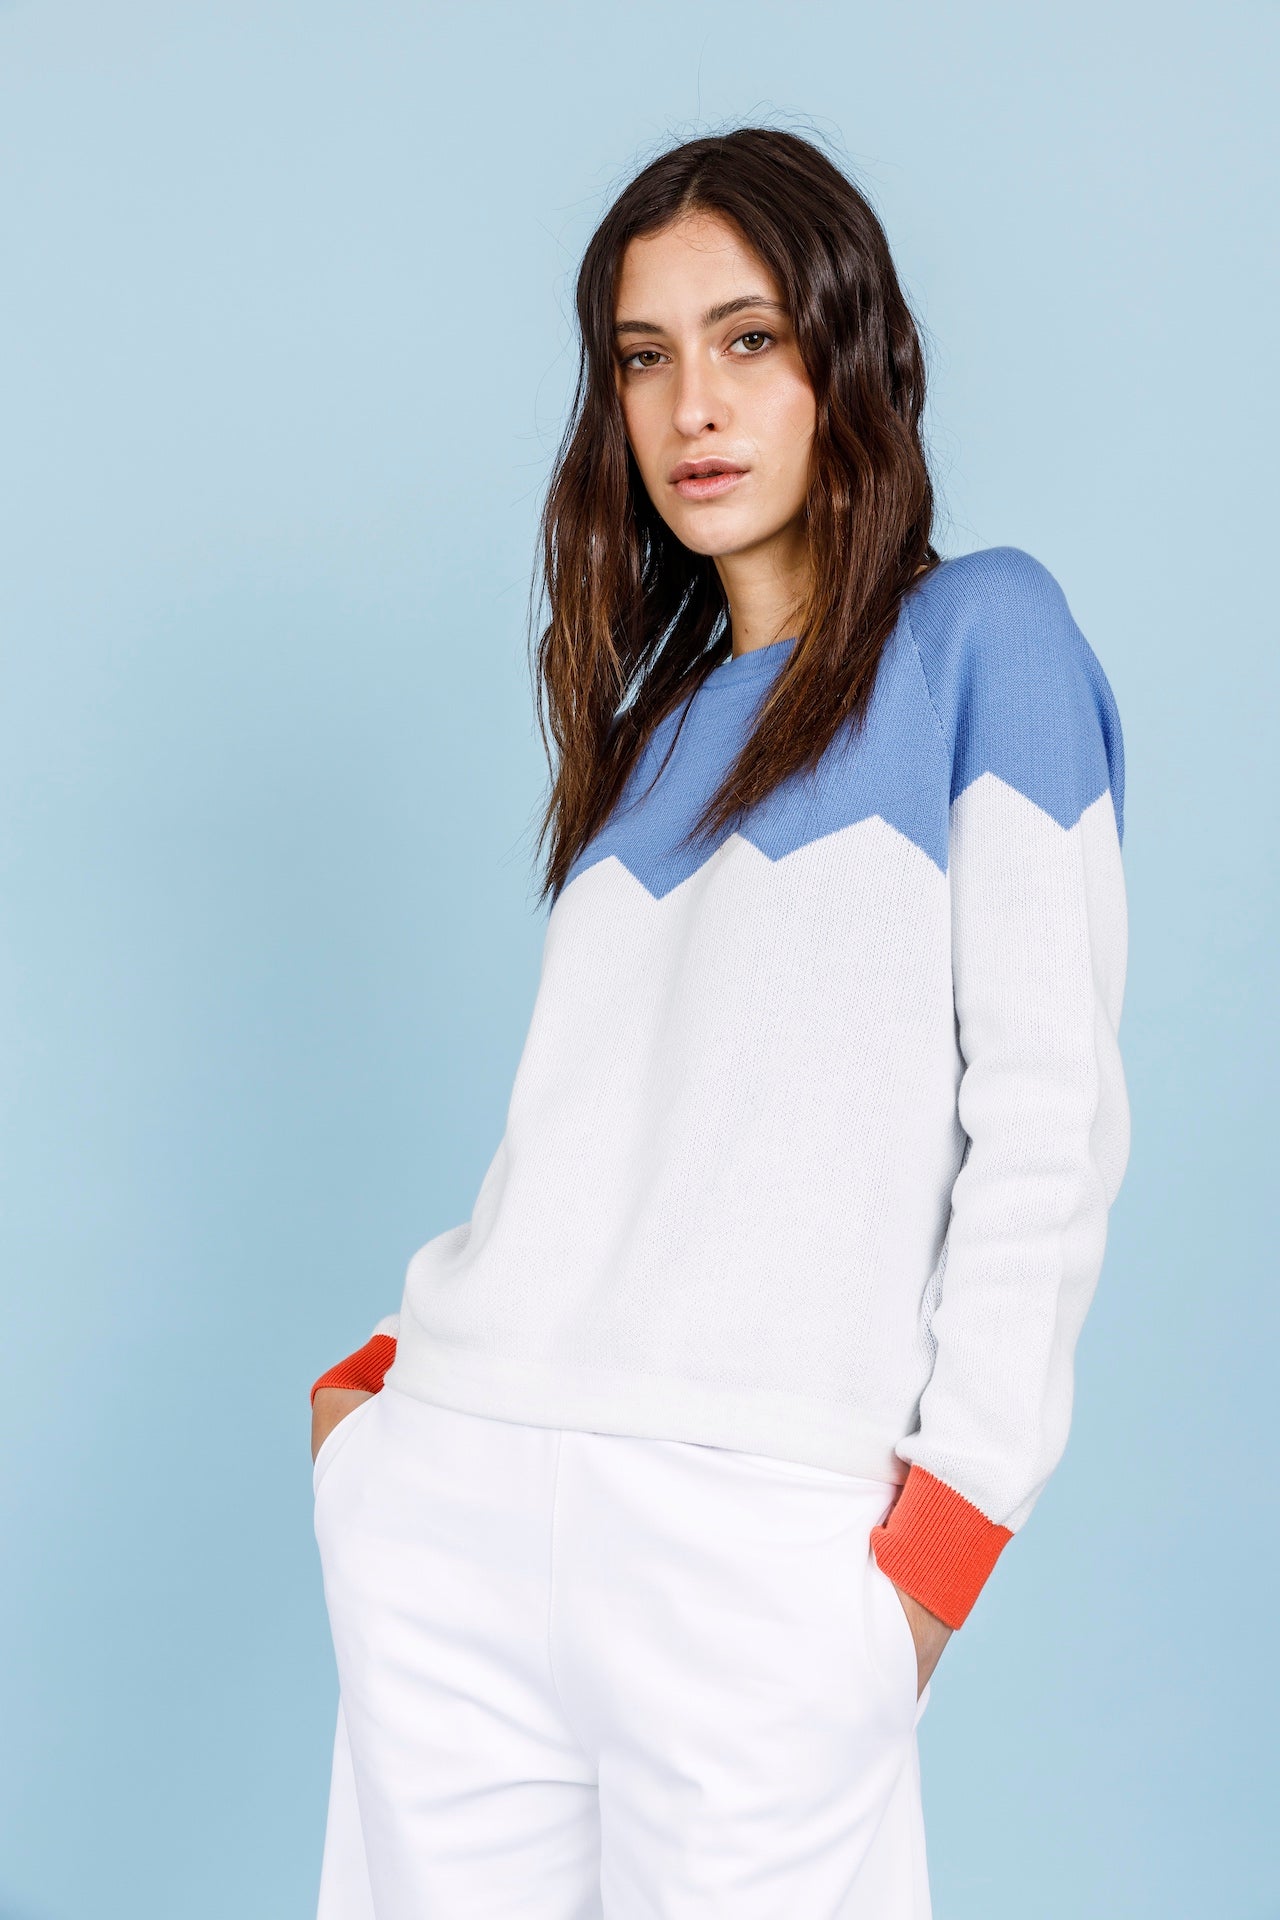 ZIG ZAG JUMPER - Light blue, white and coral